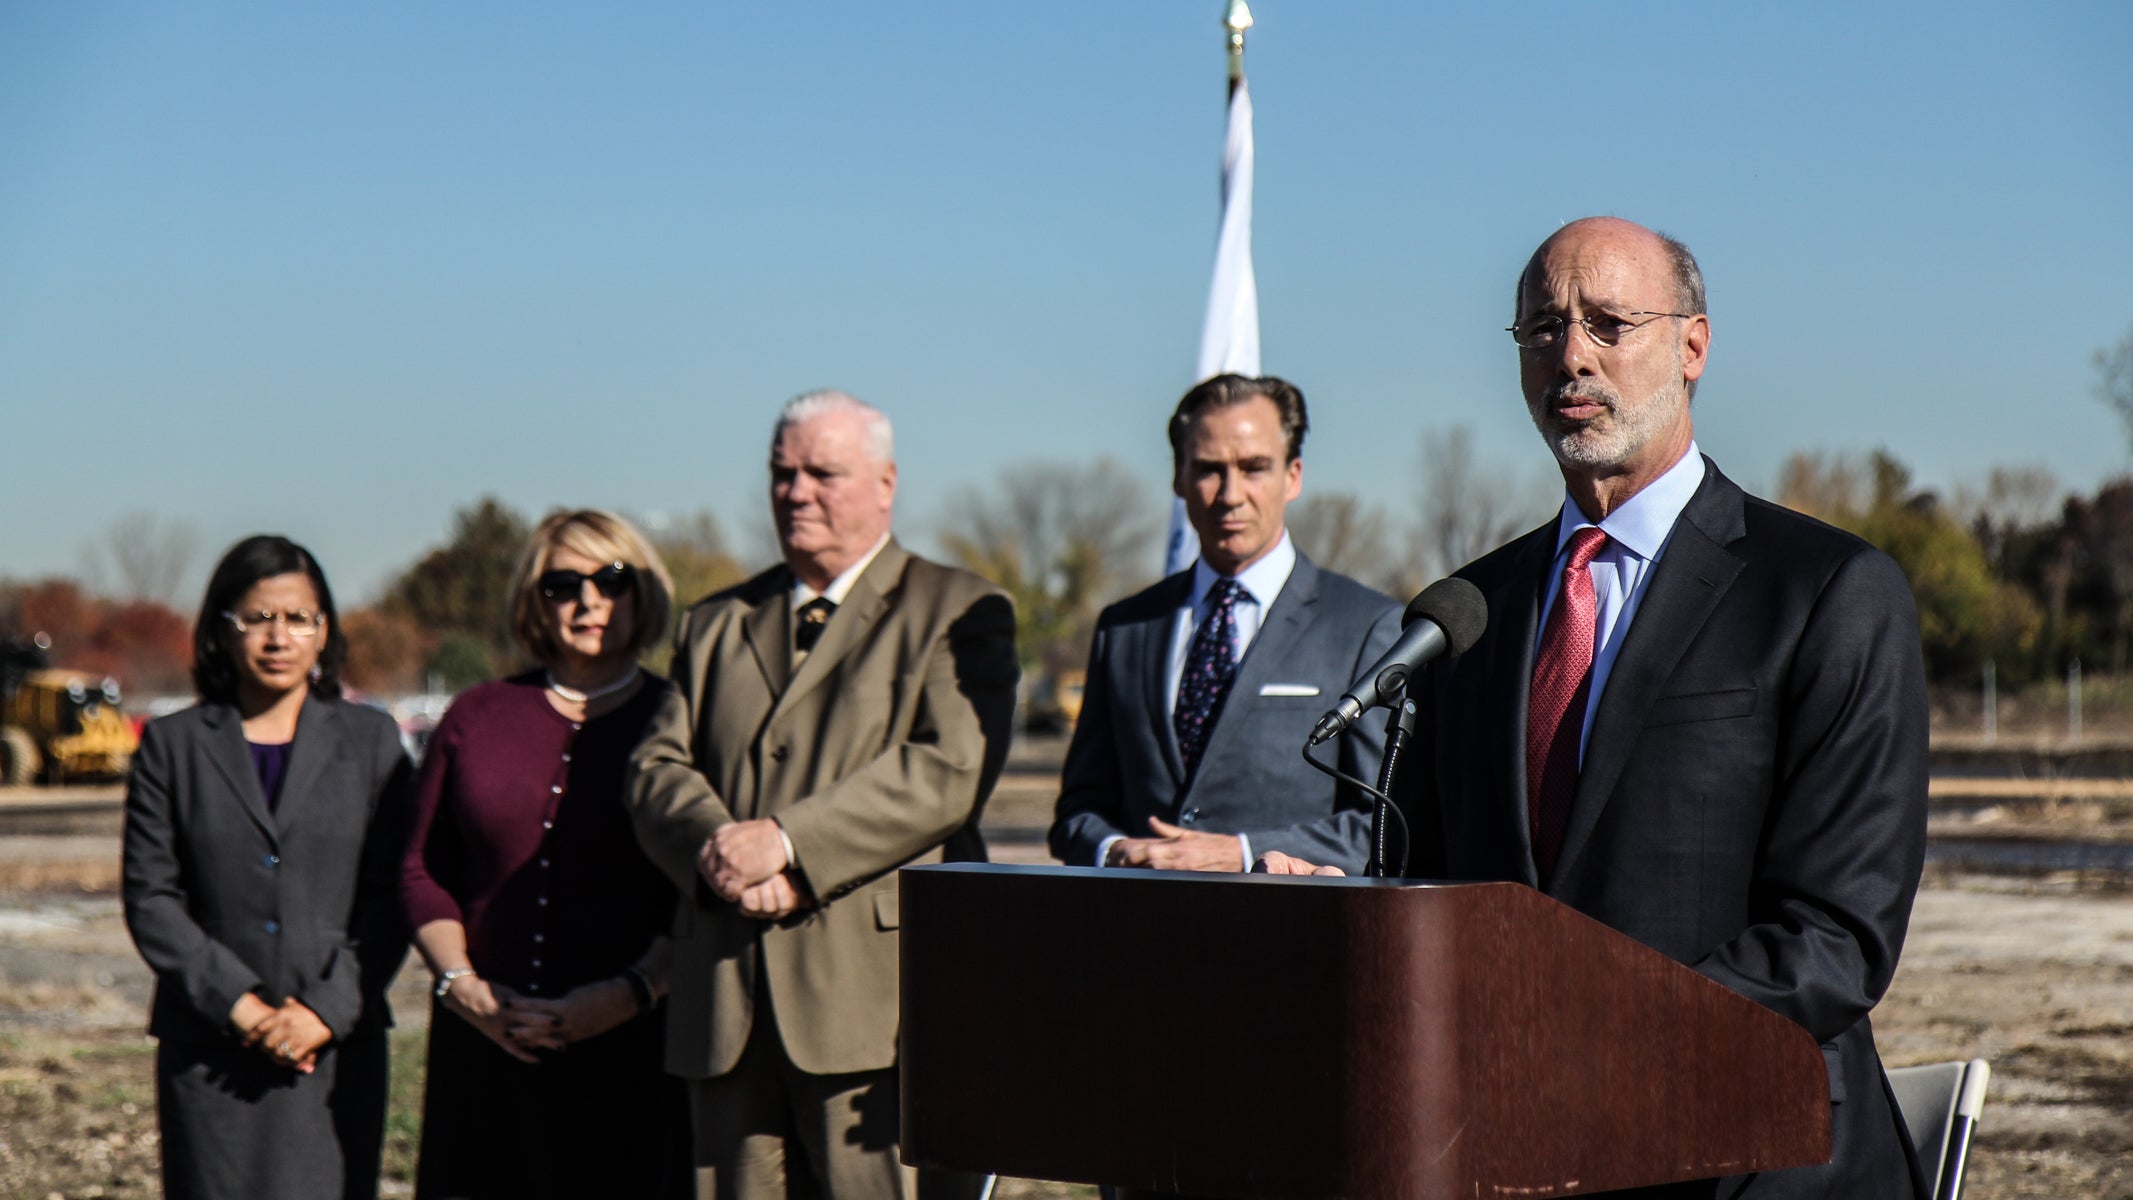  Pa. Gov. Tom Wolf talks about his support for port development Wednesday at Philadelphia's Navy Yard. (Kimberly Paynter/WHYY) 